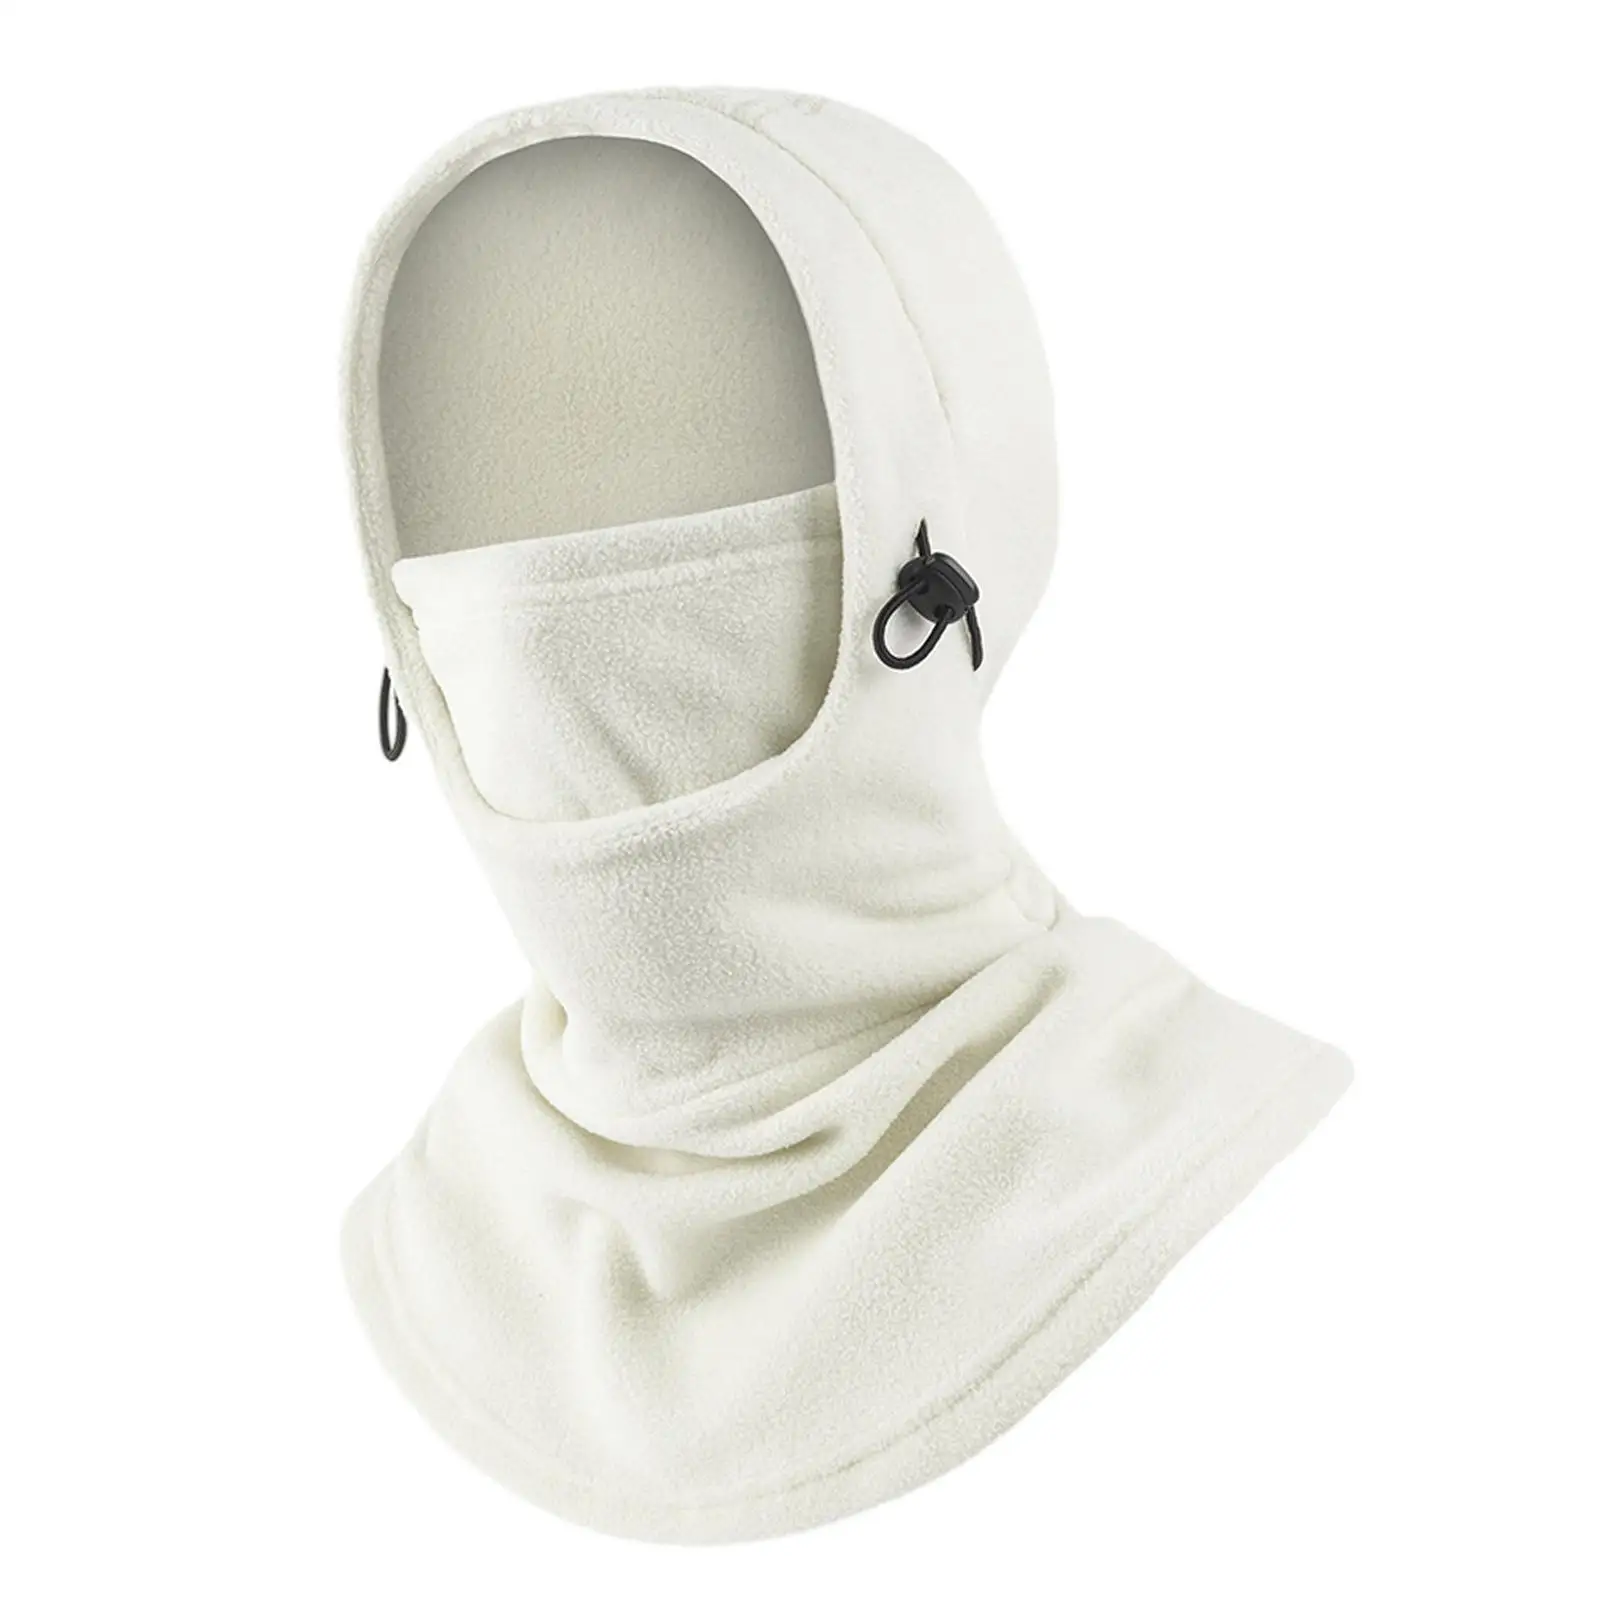 Winter Balaclava Thermal Warm Hood for Hiking Motorcycle Accessories Fishing